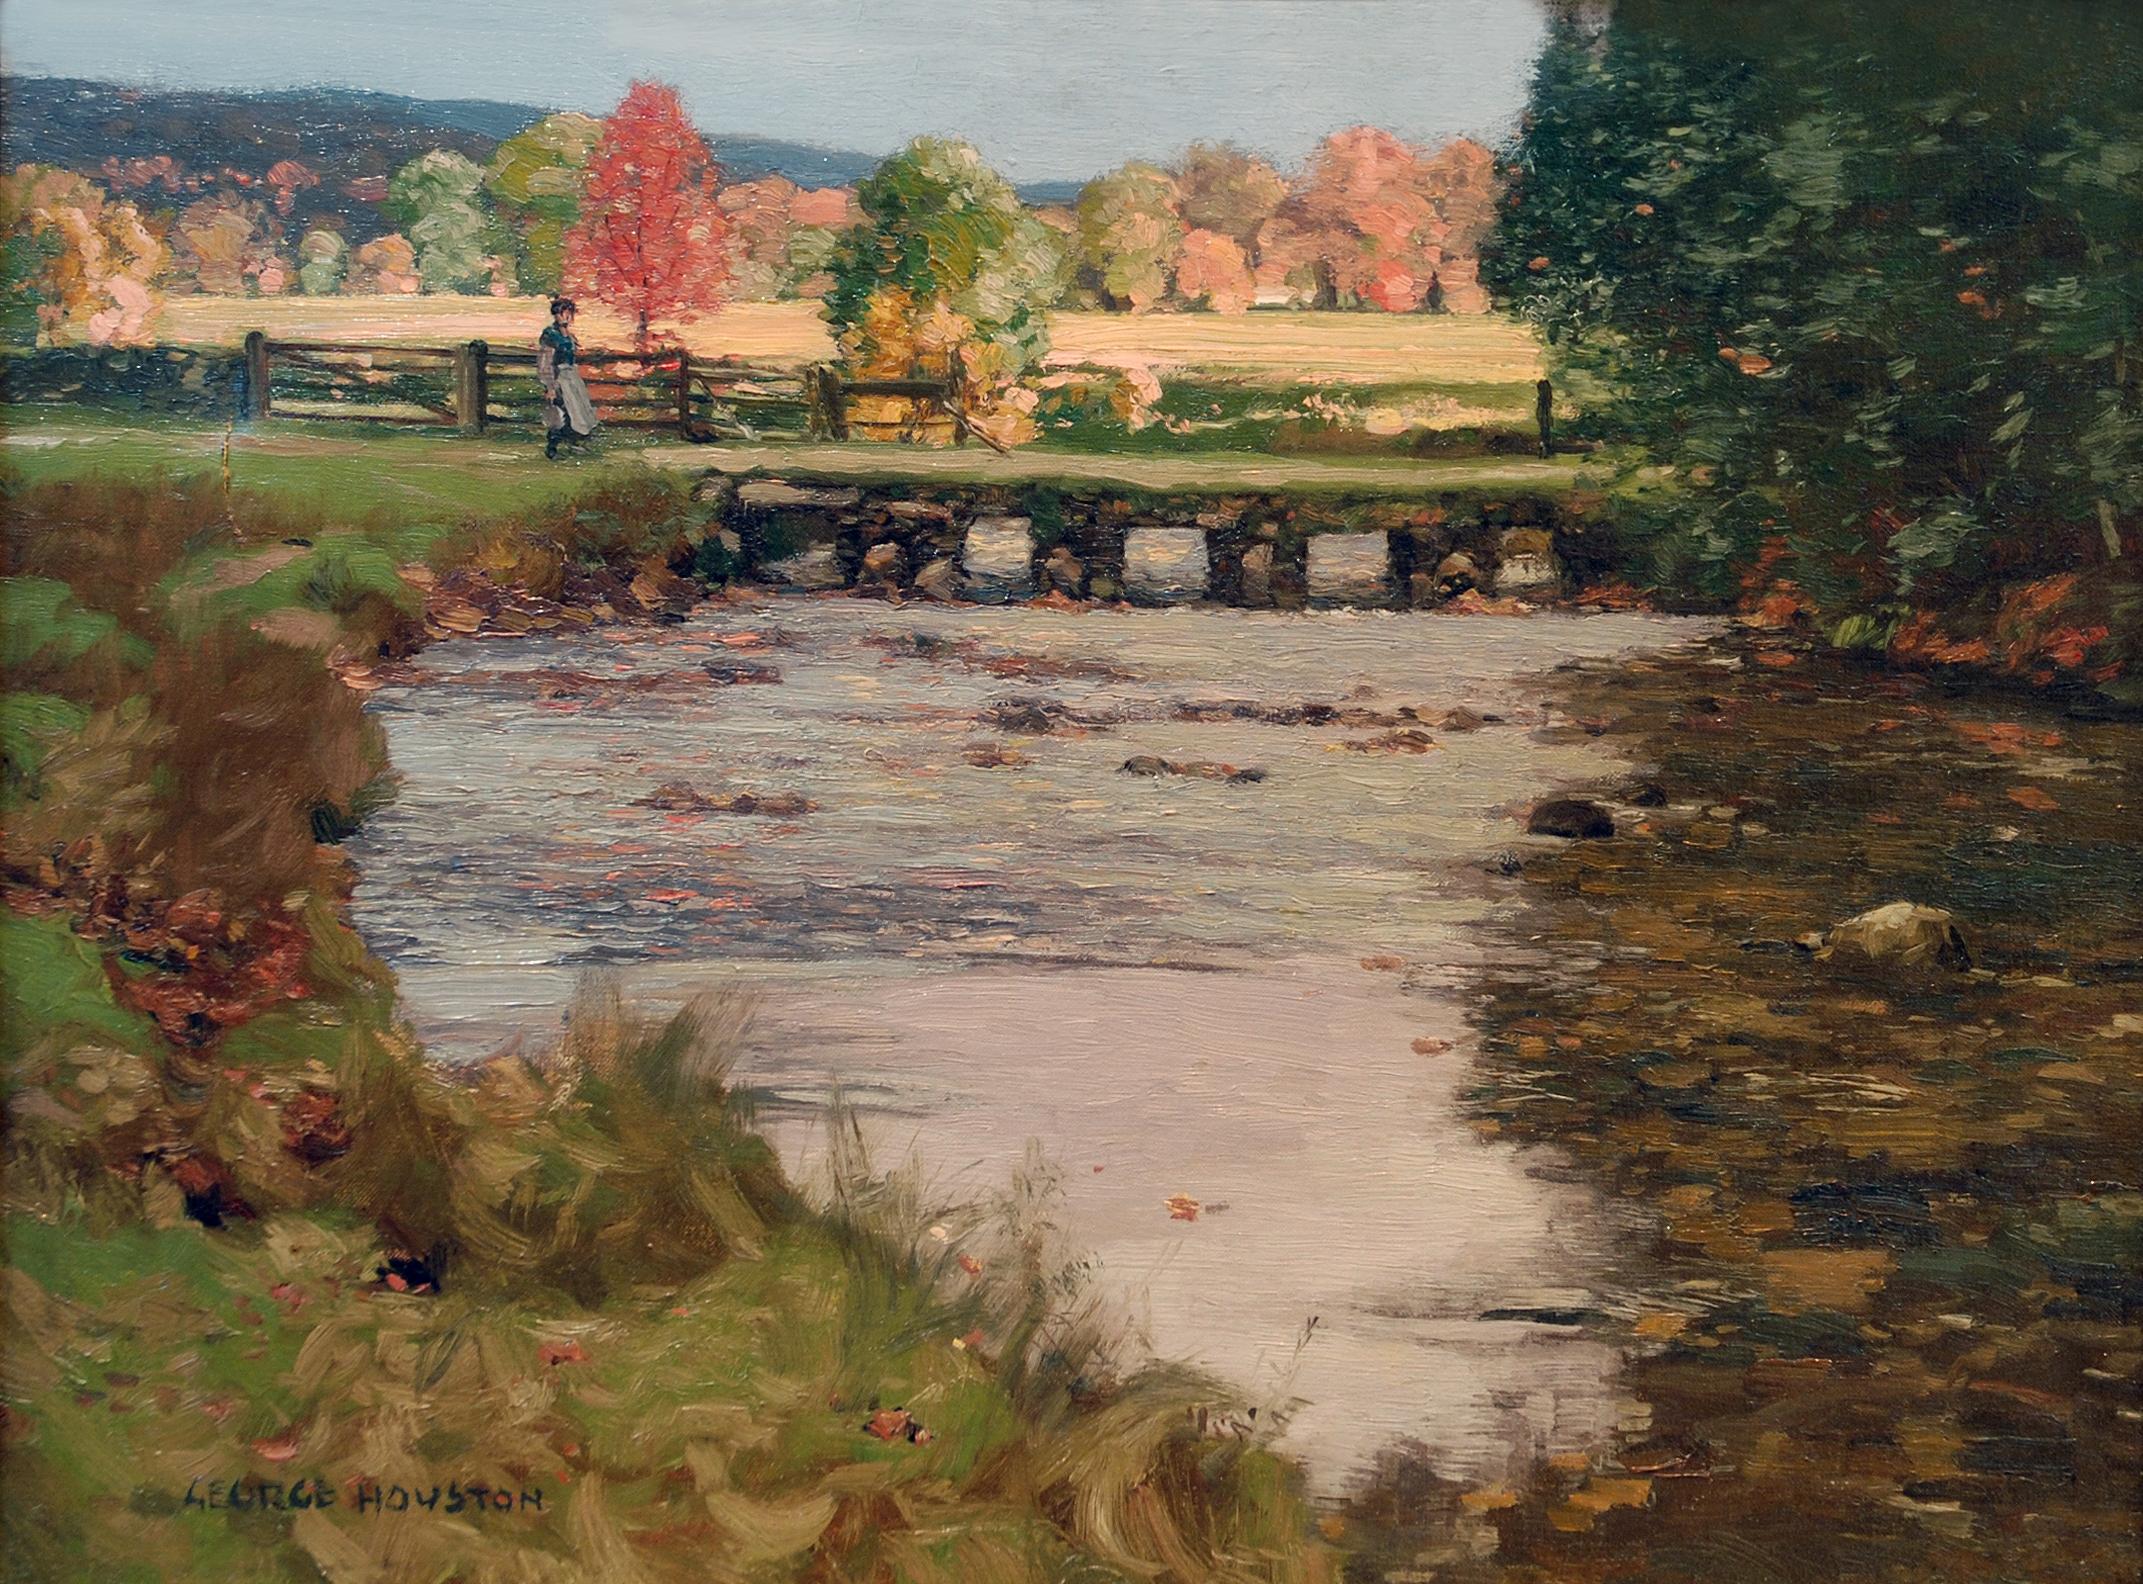 'Footbridge' is an Impressionist pastoral scene of the Scottish landscape, most likely painted in the early 20th Century. The colour palette is beautifully autumnal and the footbridge speaks of centuries gone by. 

George Houston was born in Dalry